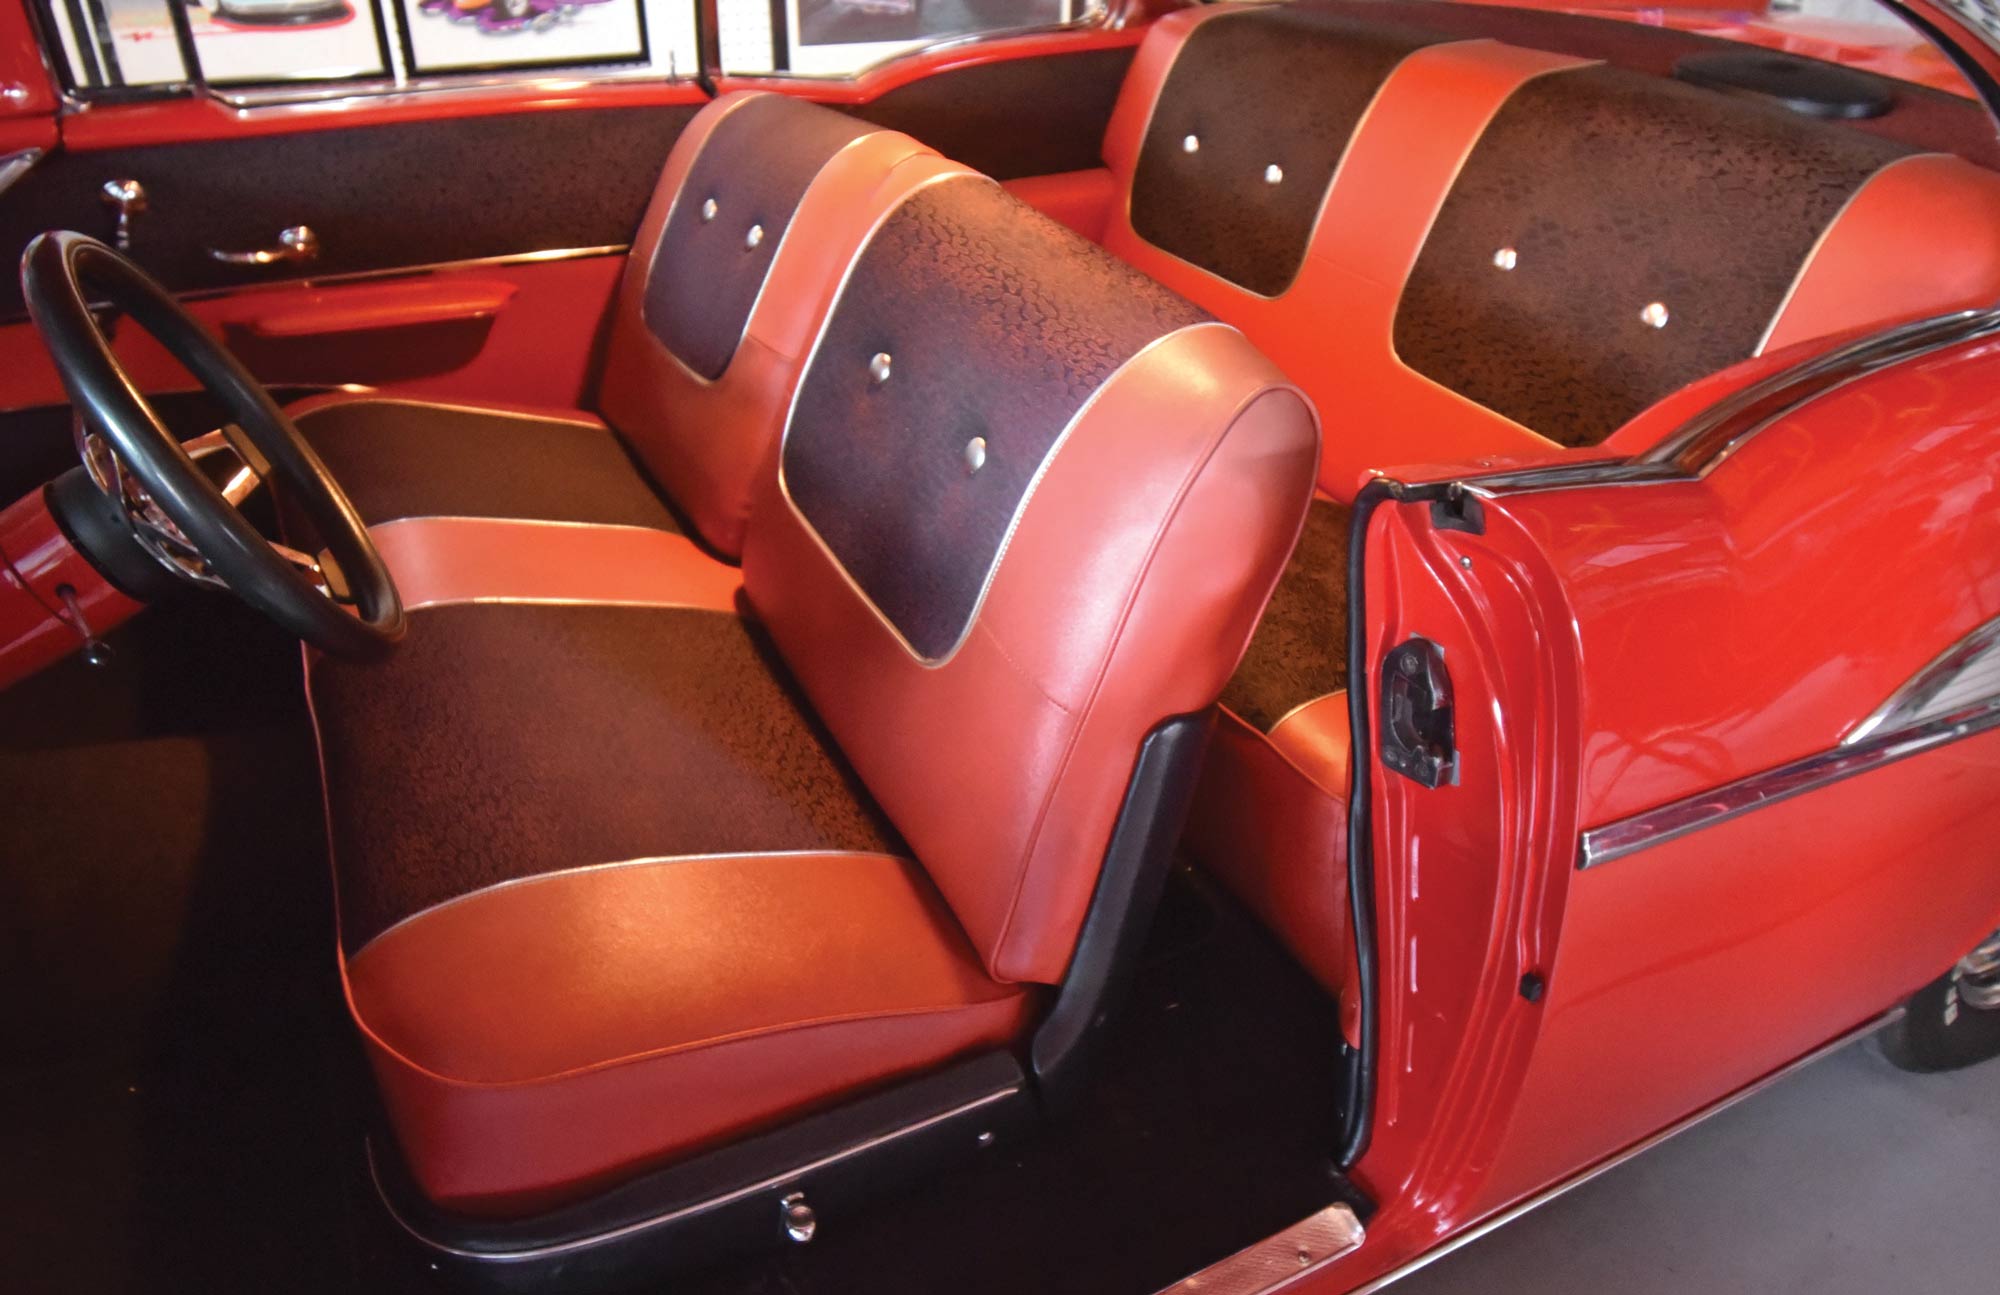 Ciadella Interiors supplied the stock 1957 upholstery kit.